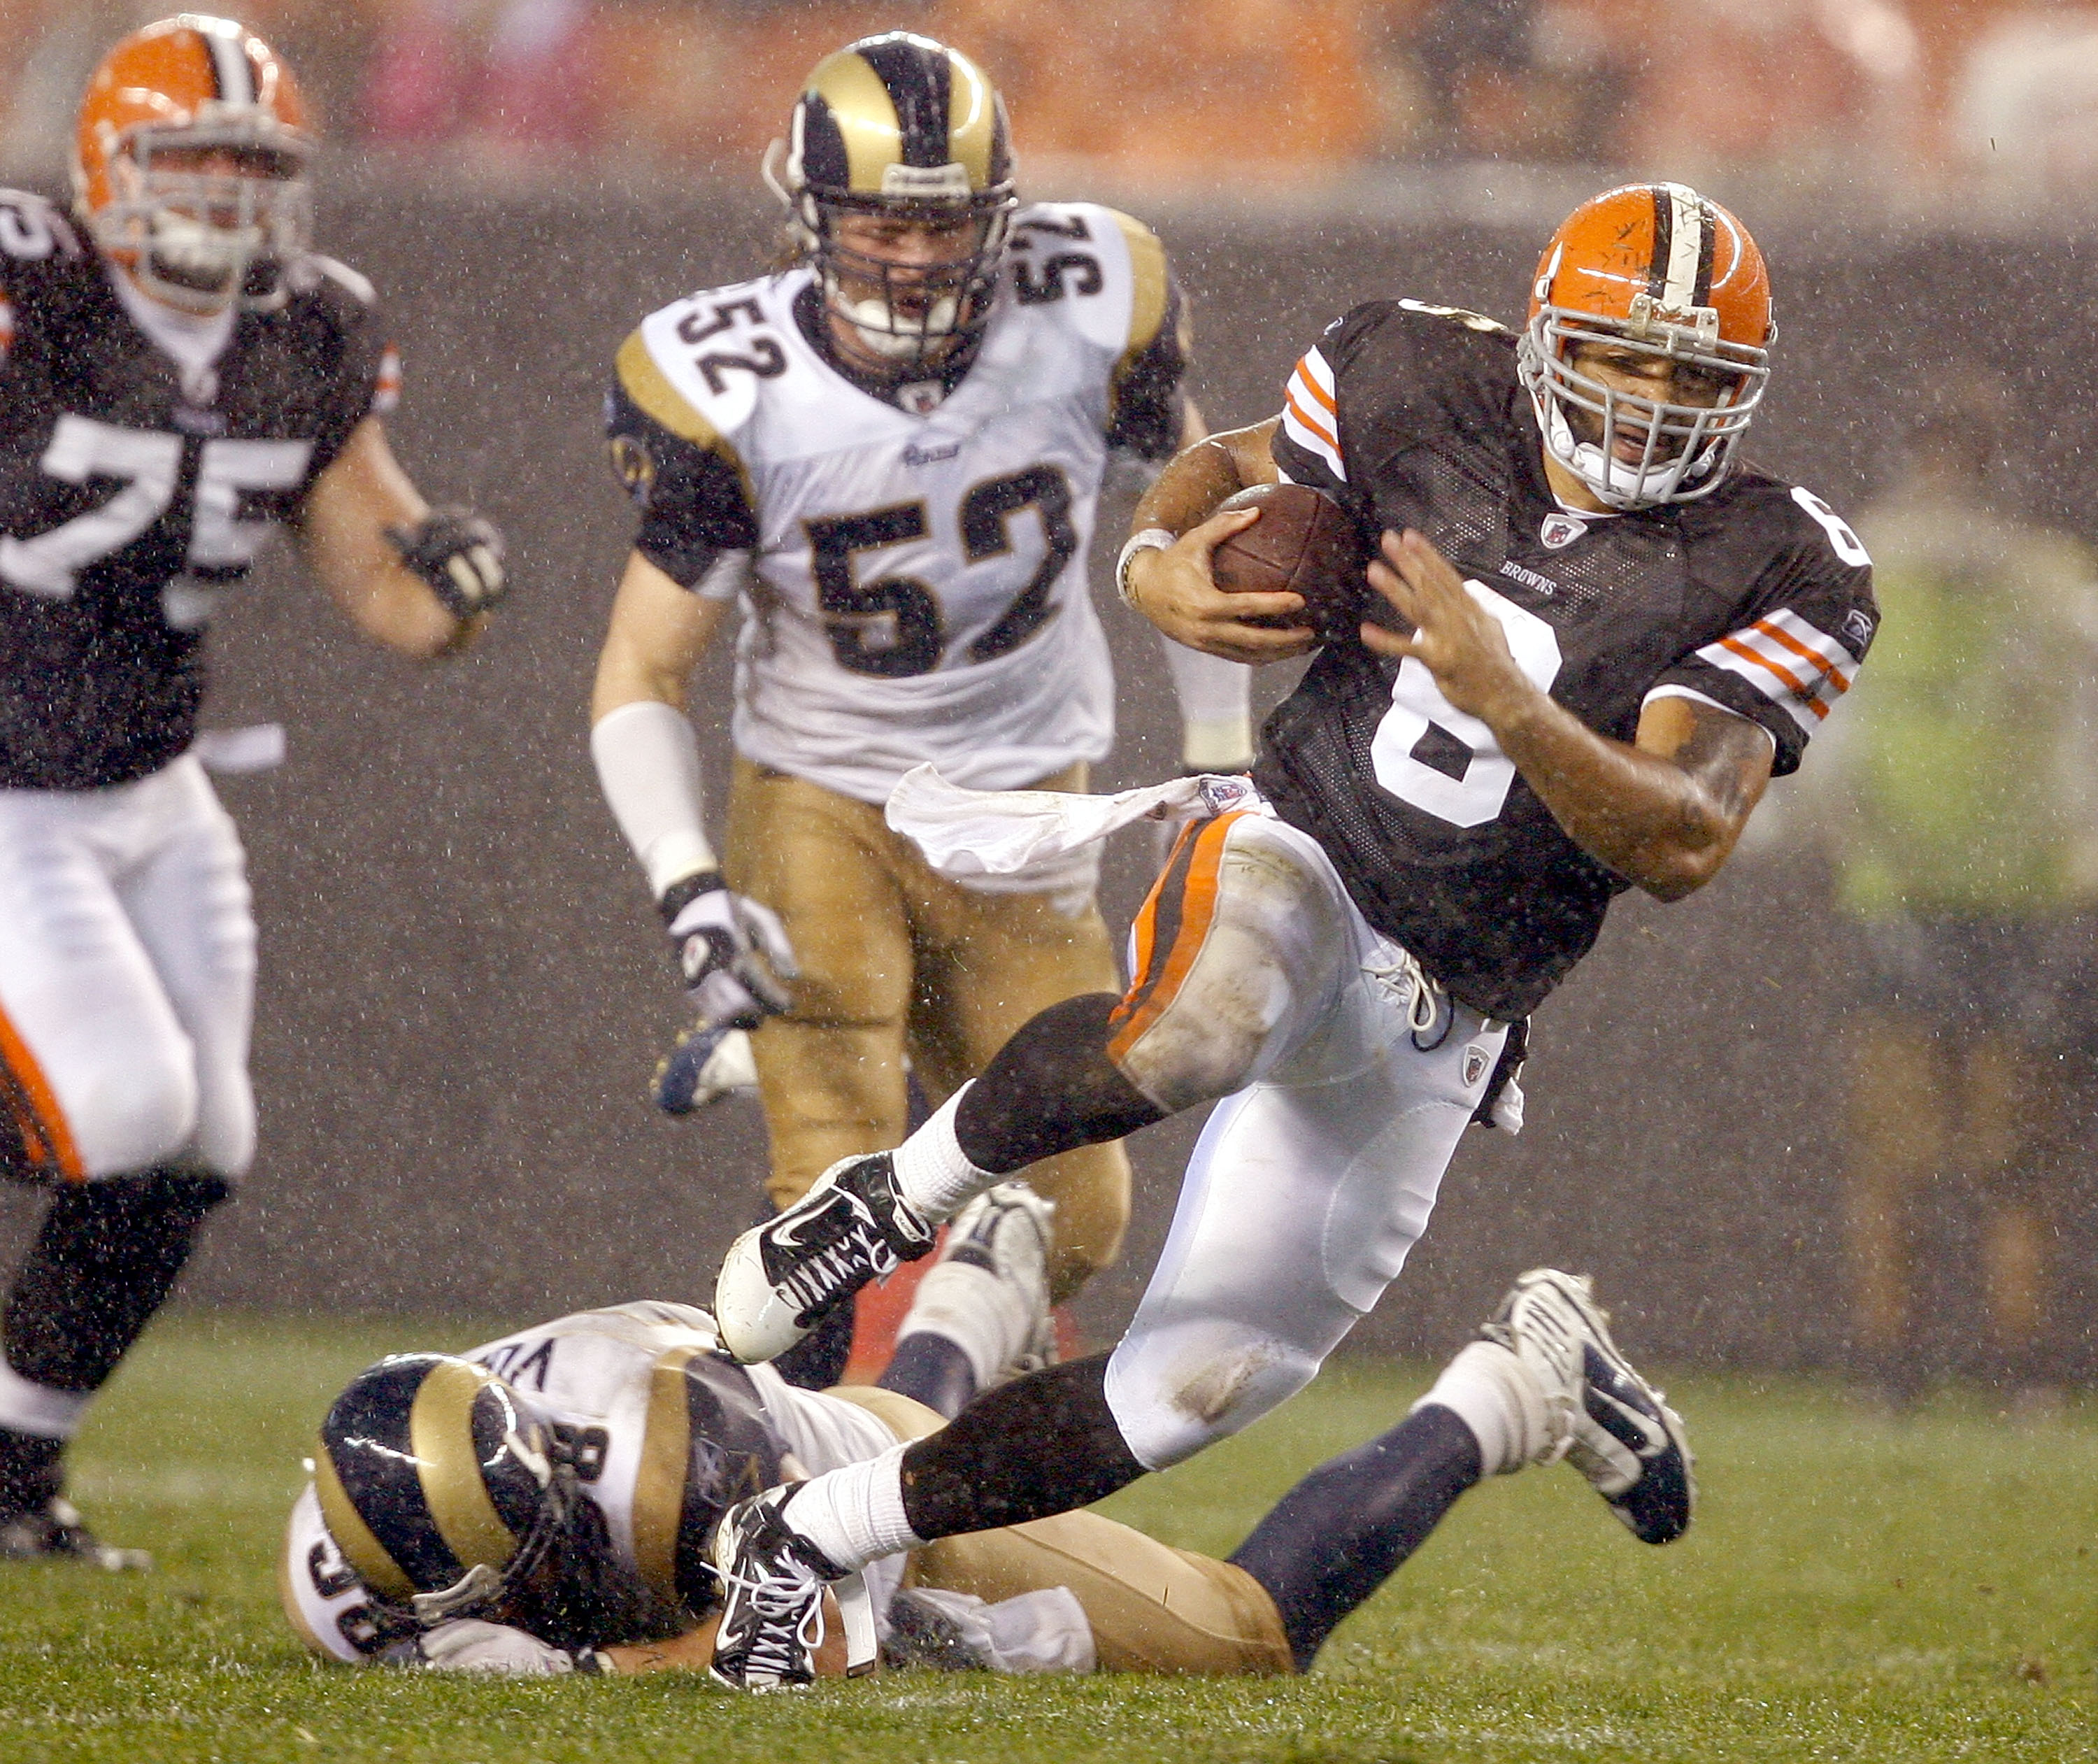 CLEVELAND - AUGUST 21:  Seneca Wallace #6 of the Cleveland Browns runs by David Vobora #58 of the St. Louis Rams at Cleveland Browns Stadium on August 21, 2010 in Cleveland, Ohio.  (Photo by Matt Sullivan/Getty Images)